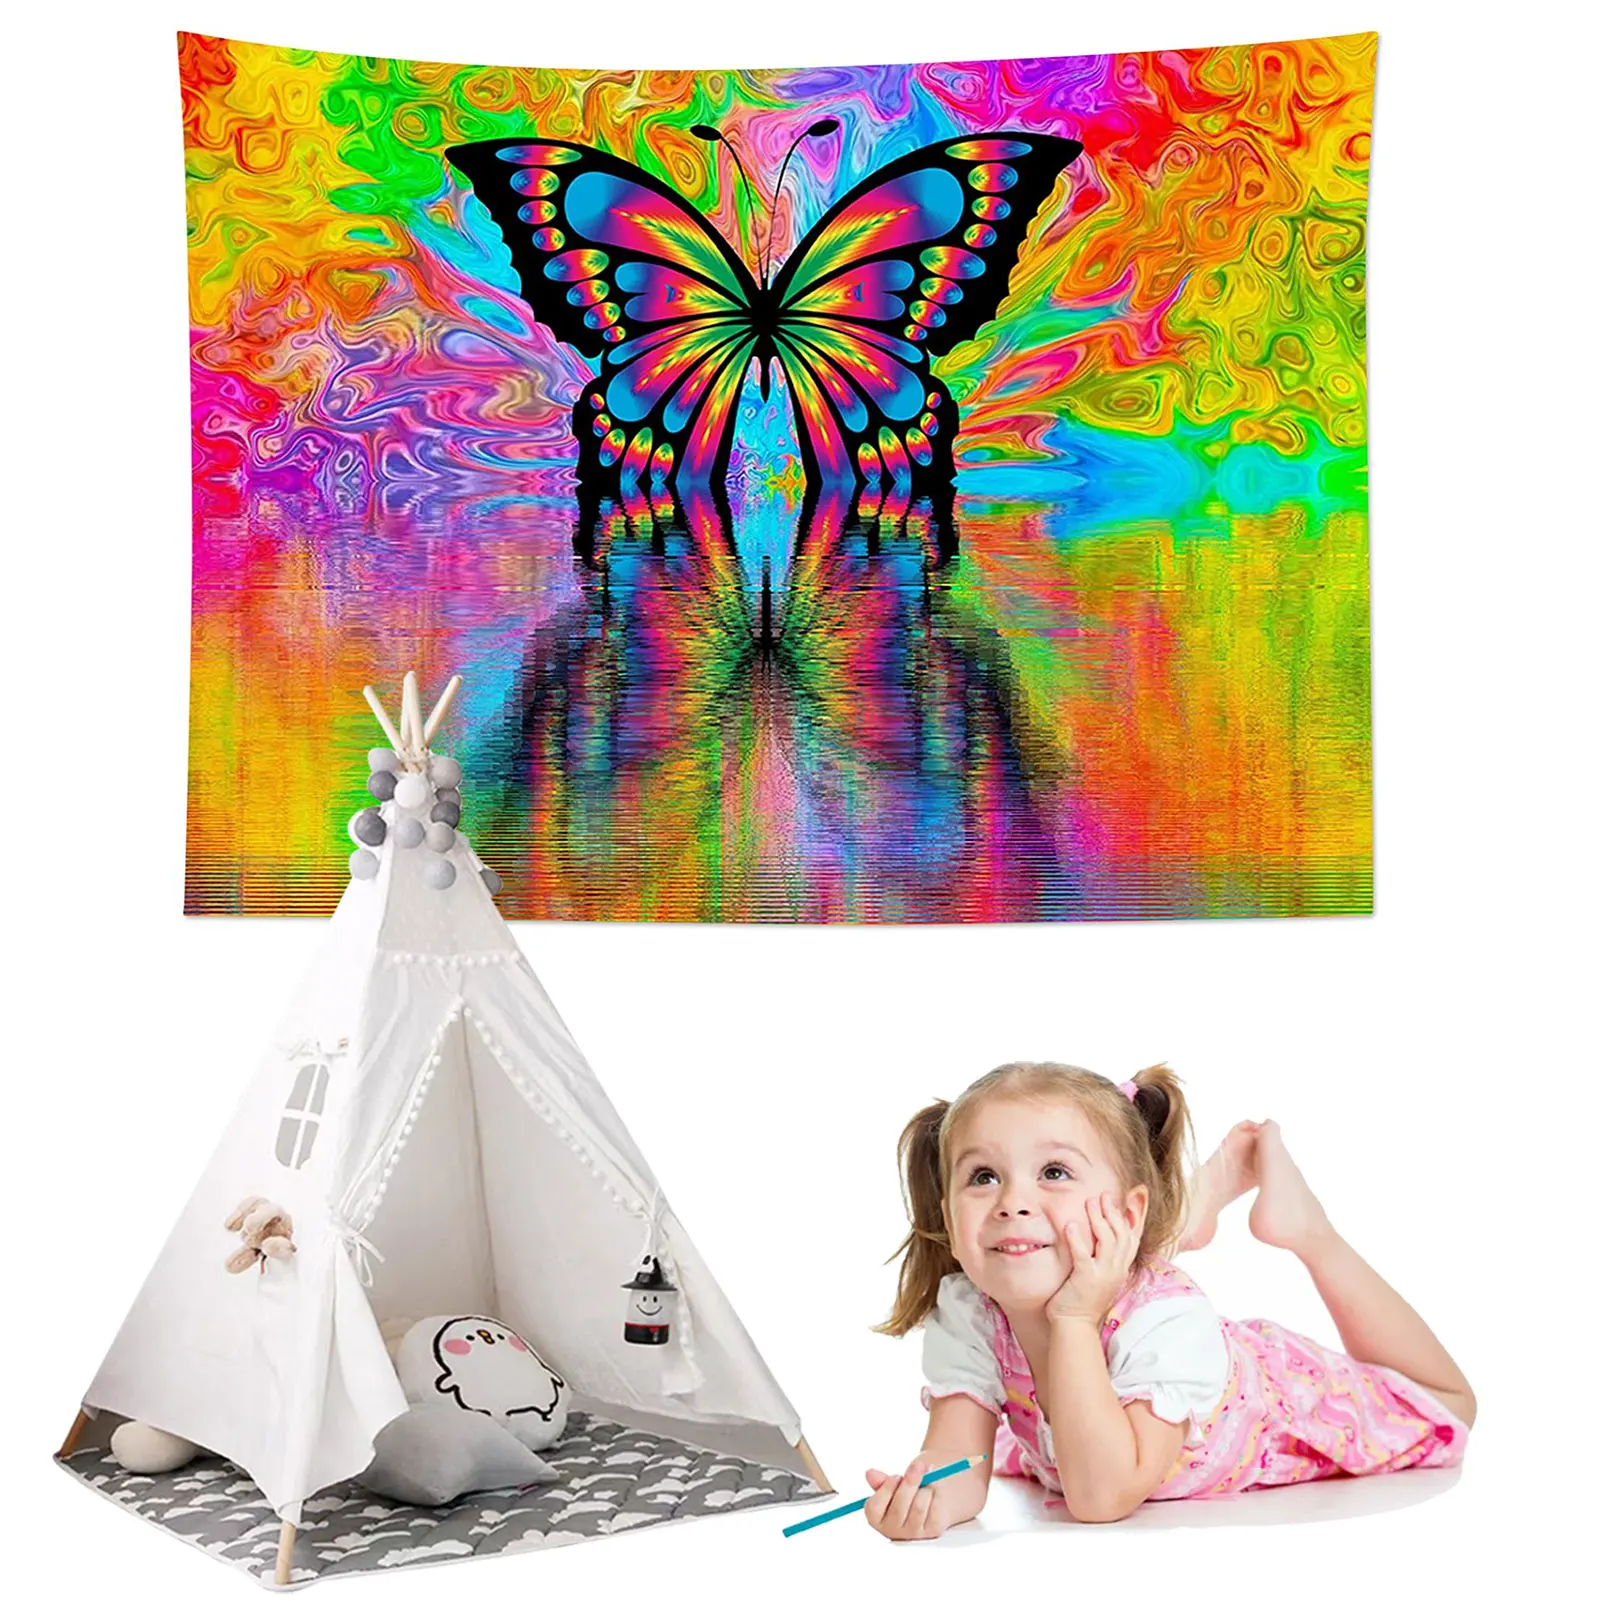 

Psychedelic Butterfly Tapestry Trippy Hippie Colourful Butterflies Wall Hanging 3D Fantasy Hippie Trippy Tapestry Wall Art